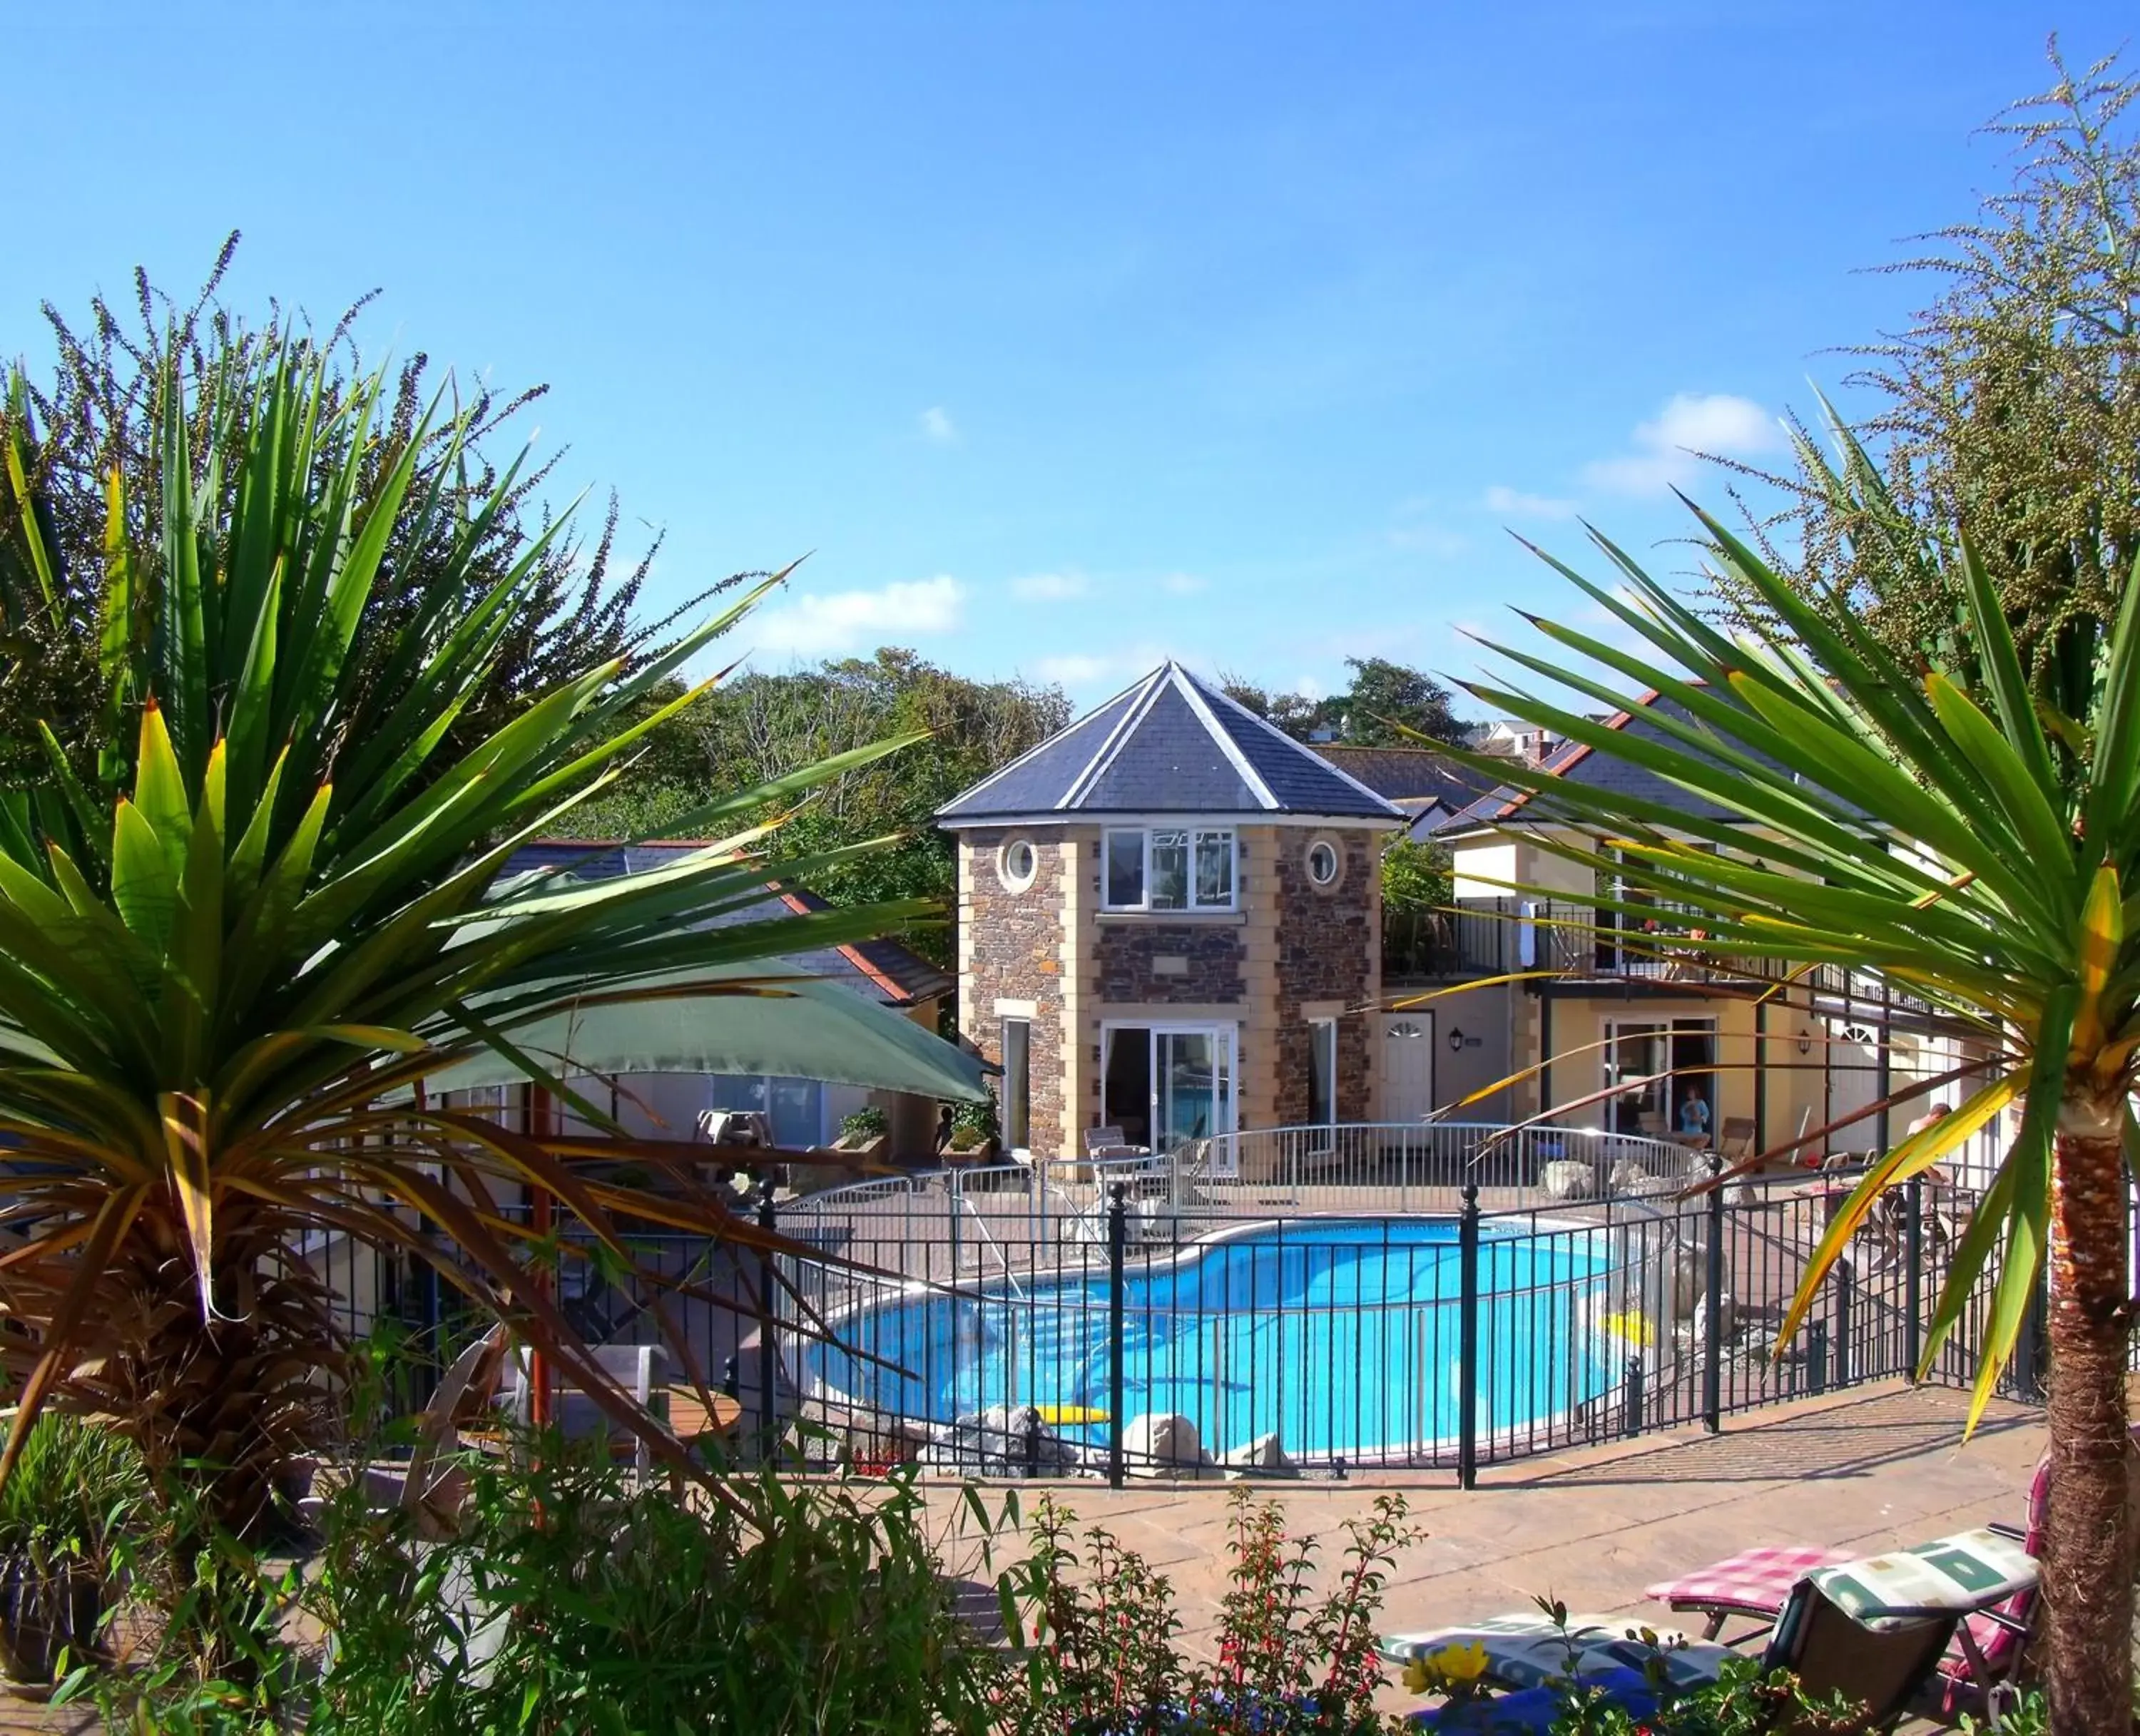 Property building, Swimming Pool in Porth Veor Manor Villas & Apartments